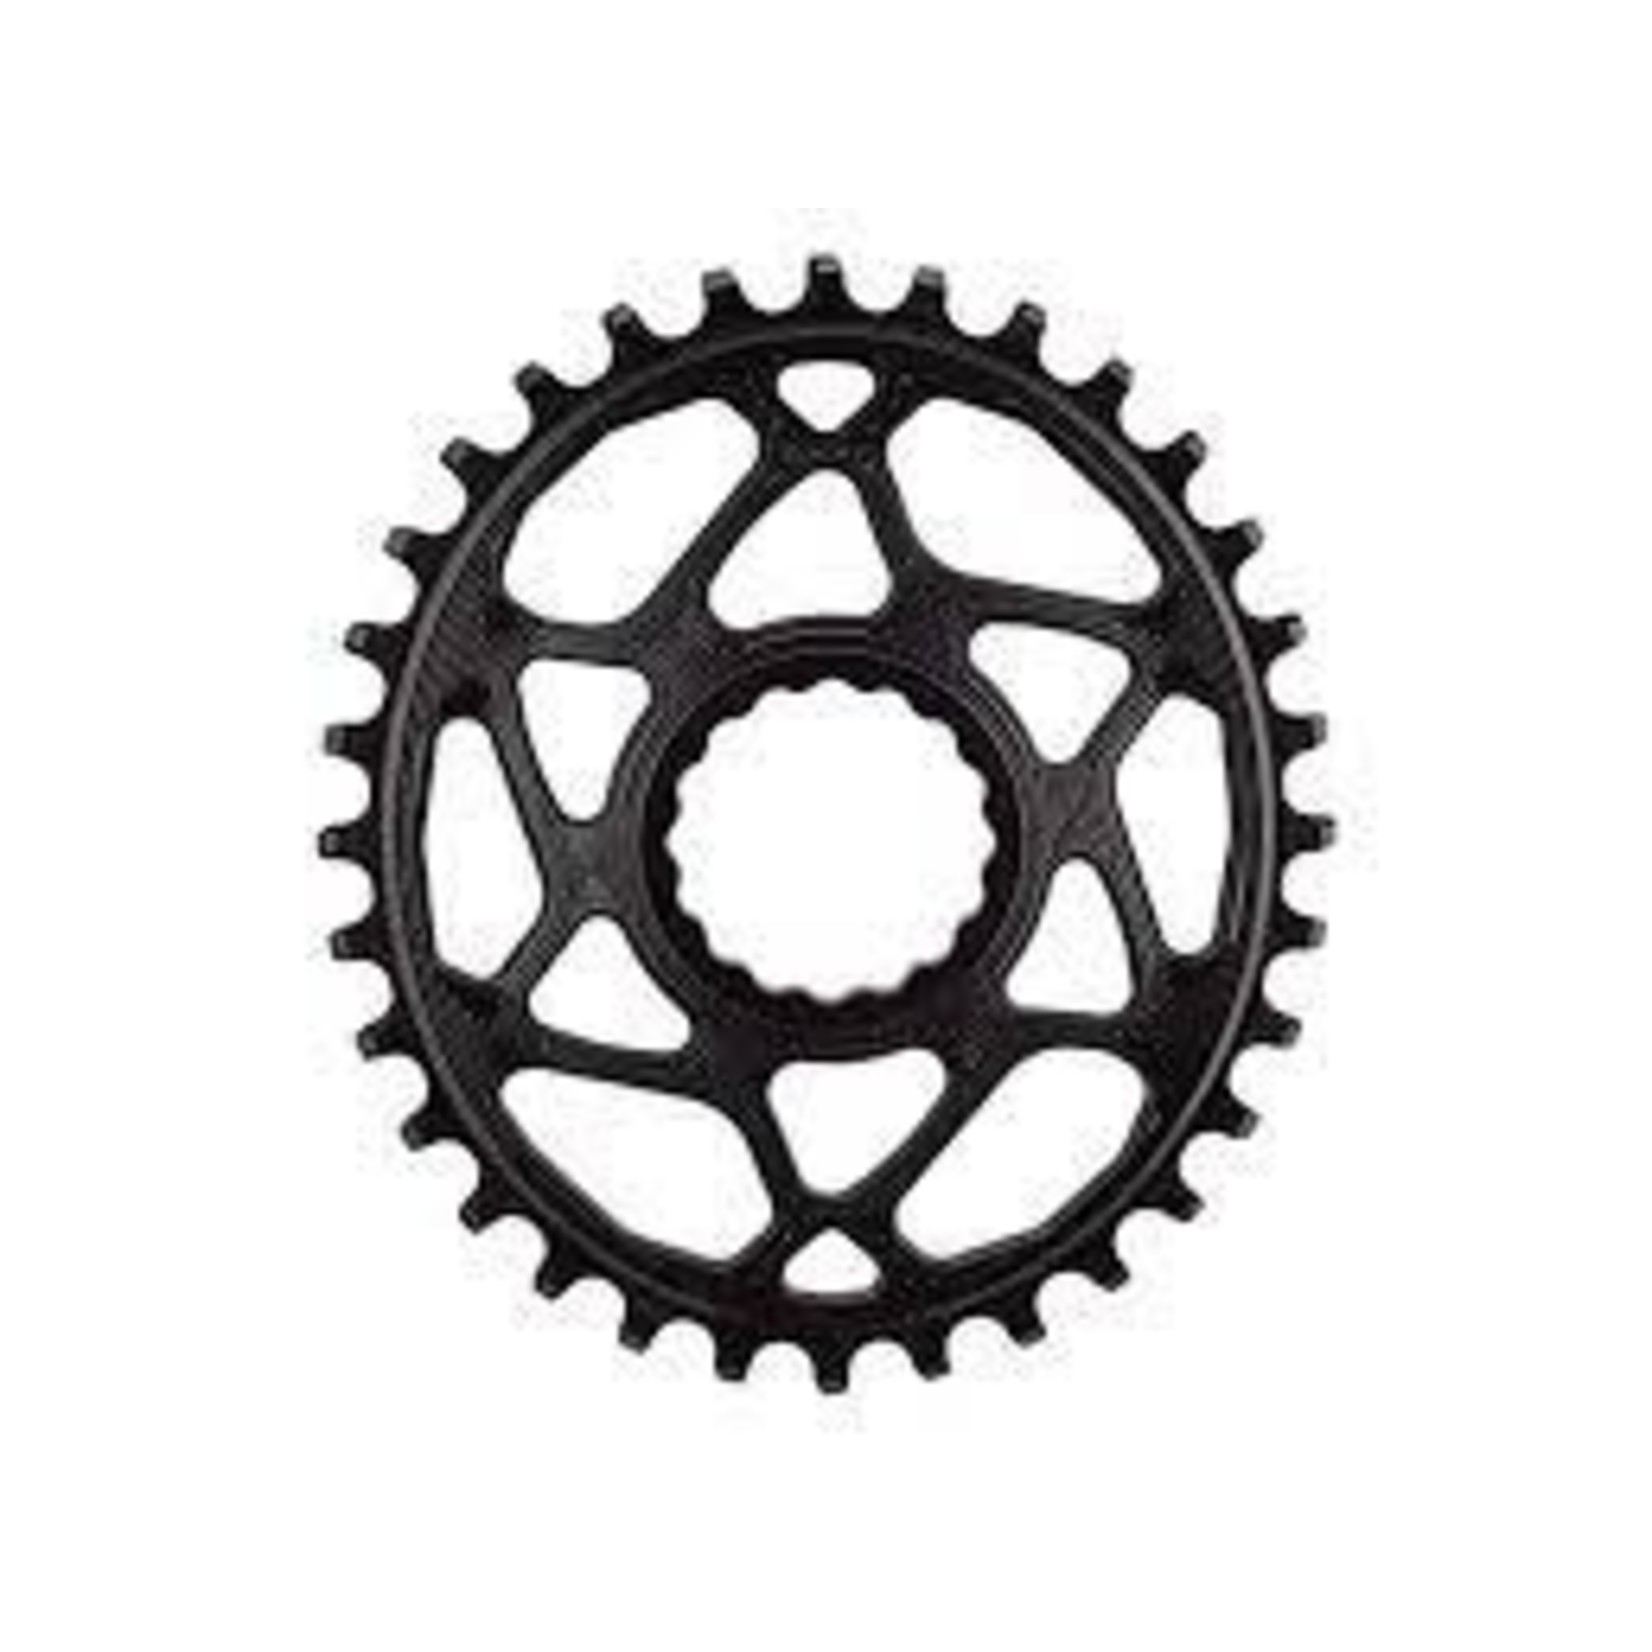 absoluteBLACK absoluteBLACK Oval Direct Mount Chainring - 32t, Shimano Direct Mount, 3mm Offset, Requires Hyperglide+ Chain, Black